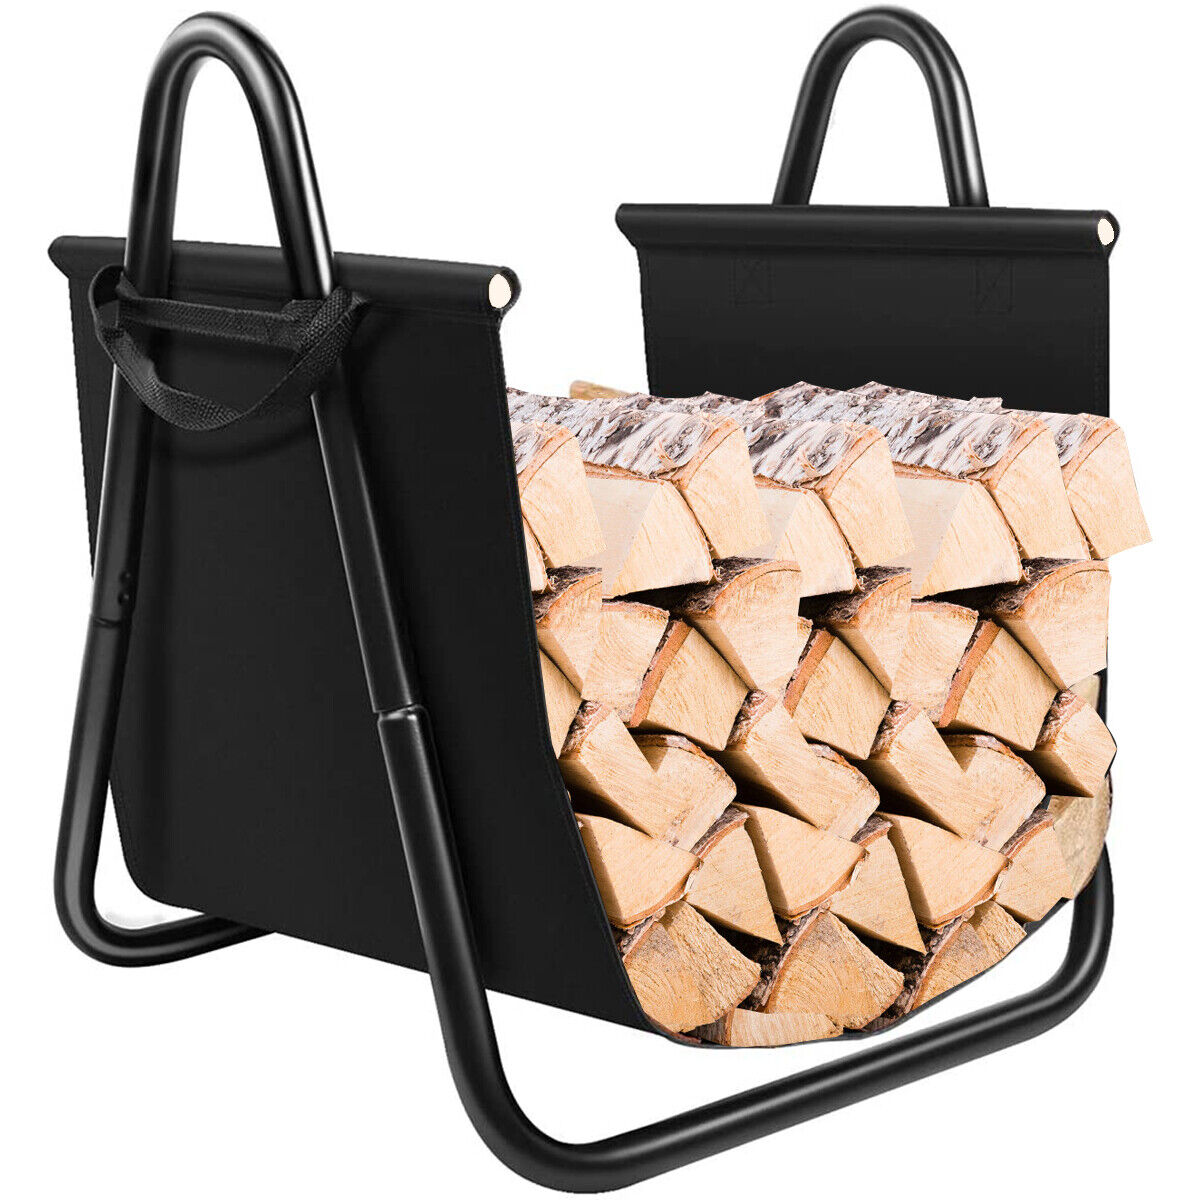 Outdoor Firewood Storage Rack Log Holder Carrier with Canvas Tote